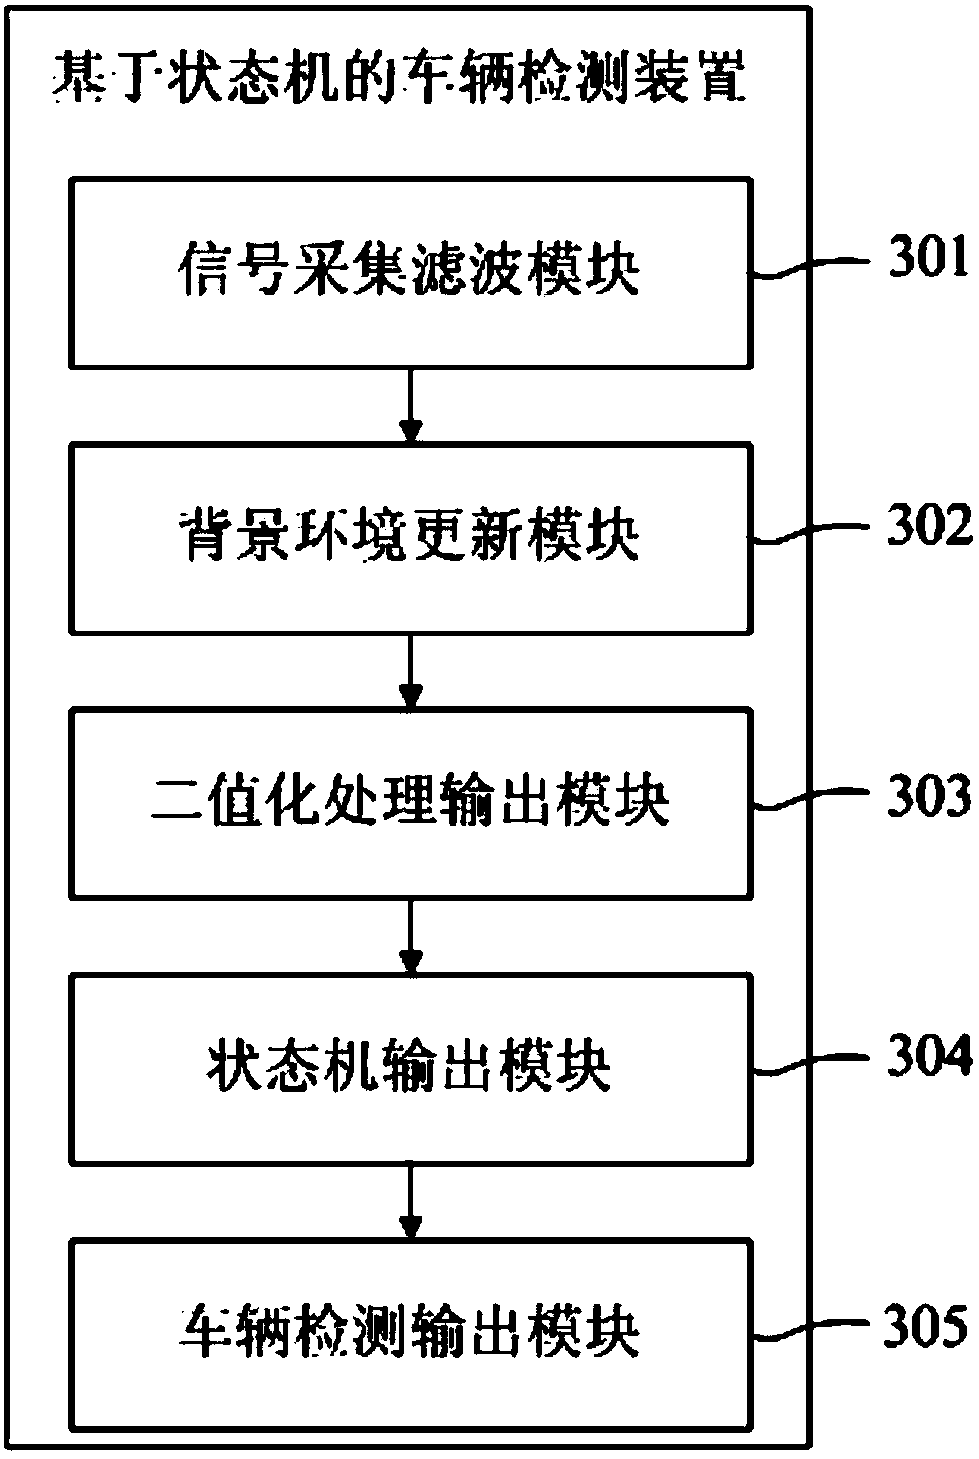 Method and device for detecting vehicle based on state machine